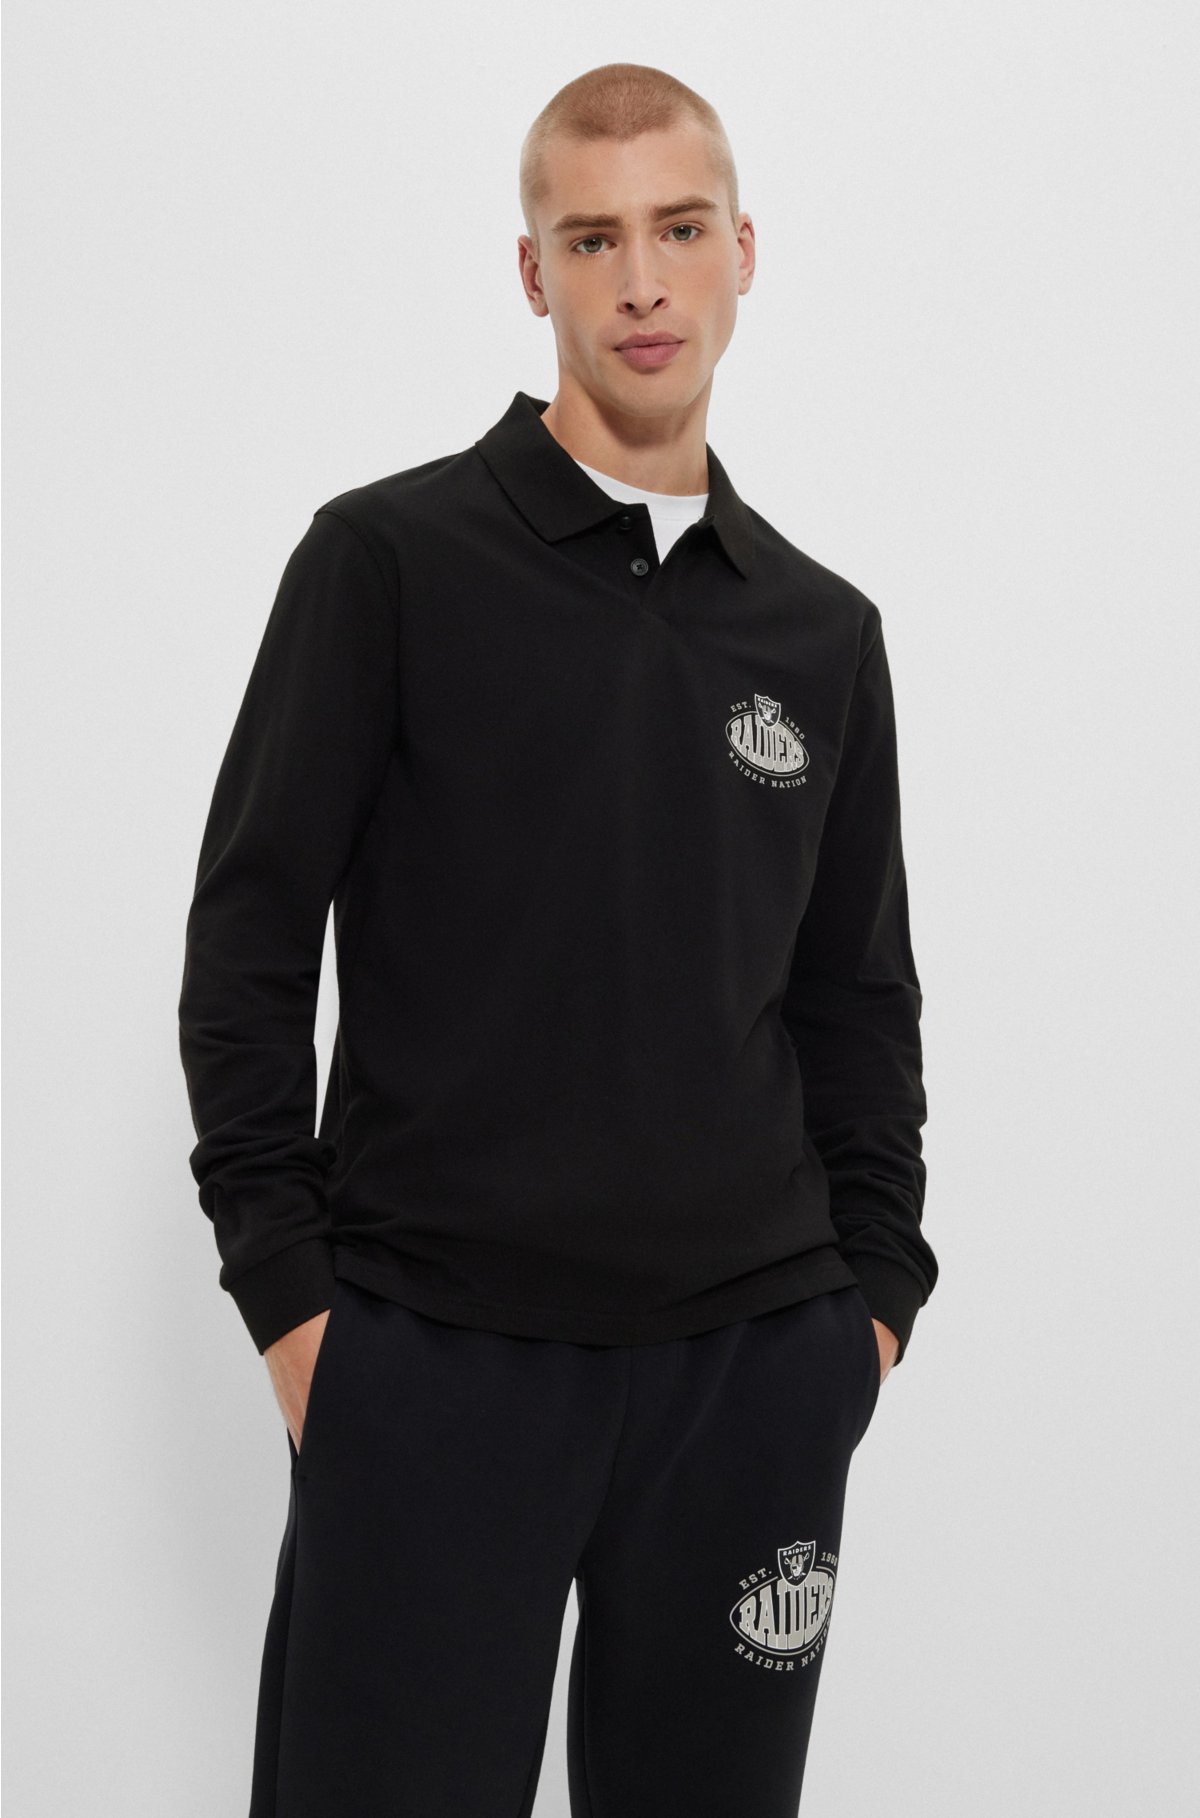 BOSS x NFL long-sleeved polo shirt with collaborative branding, Raiders